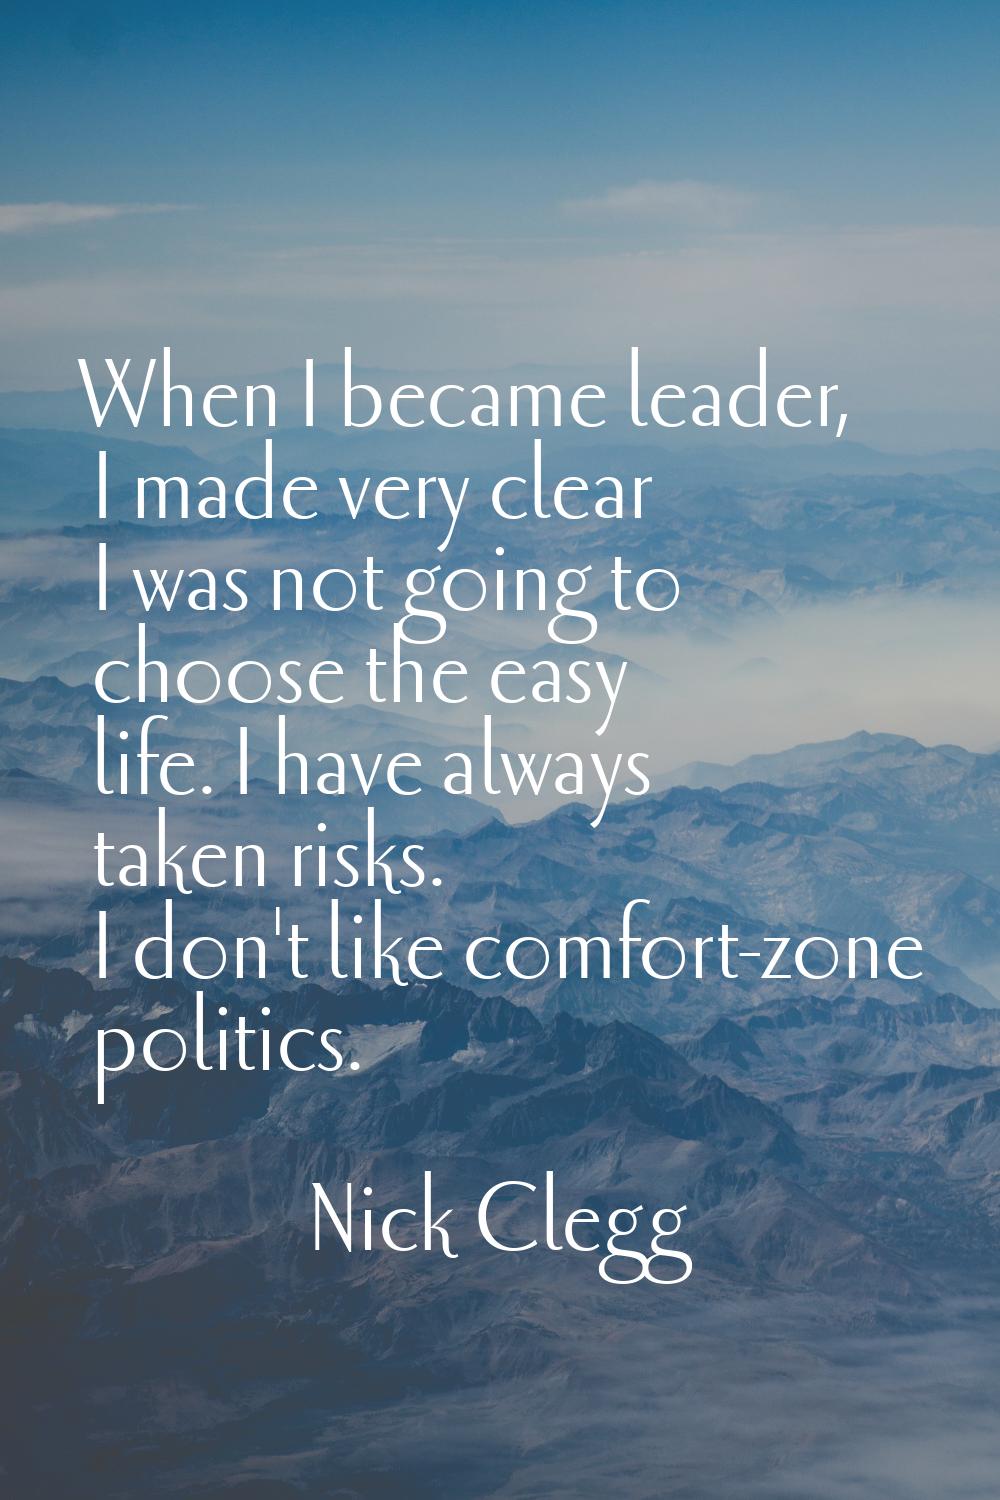 When I became leader, I made very clear I was not going to choose the easy life. I have always take